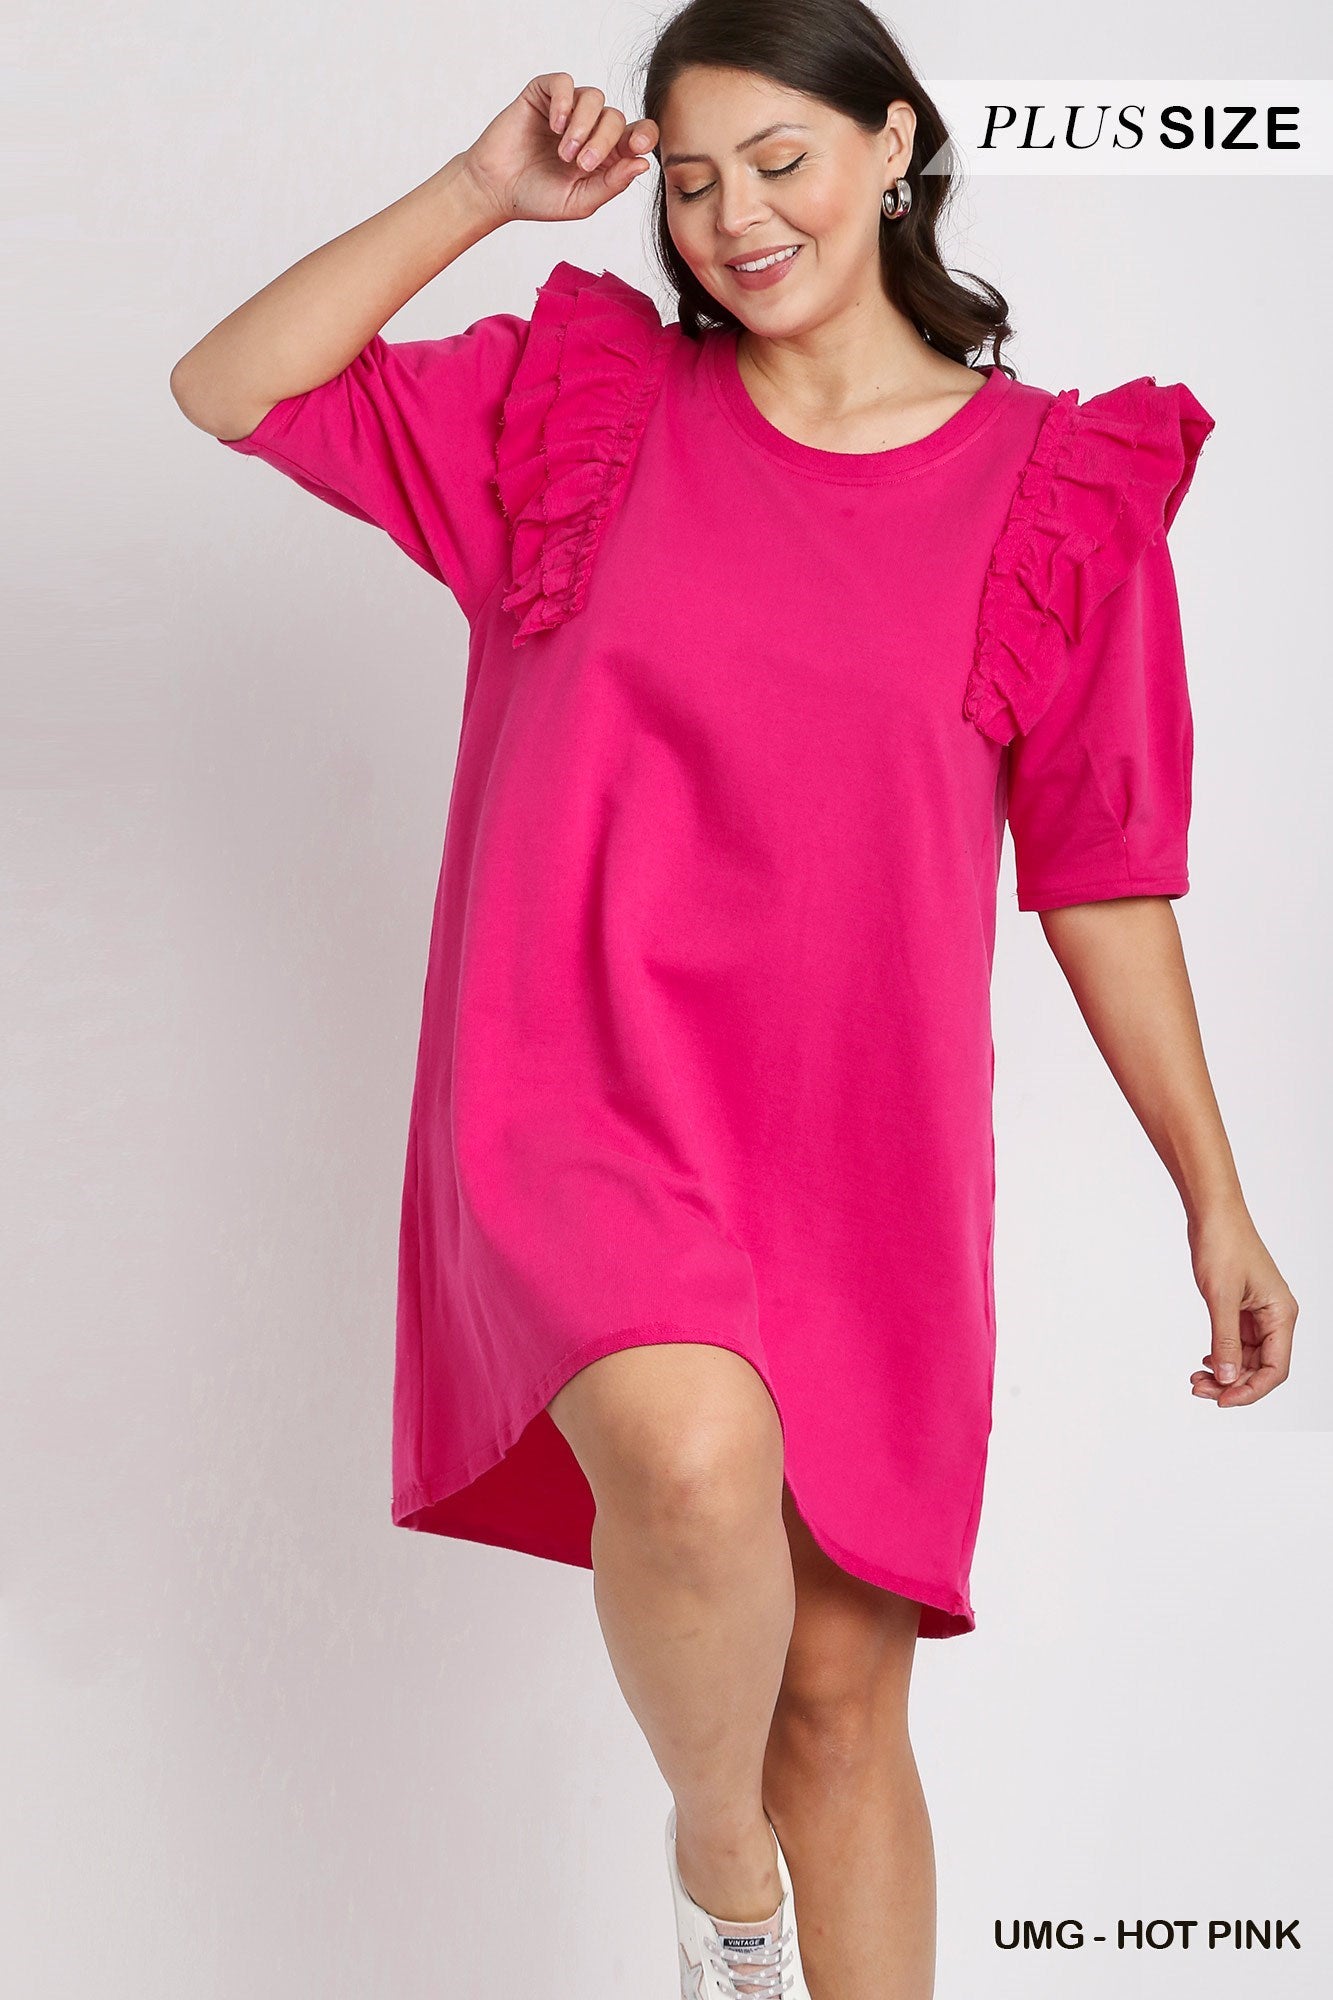 Umgee Plus Size French Terry Cotton Dress - Roulhac Fashion Boutique